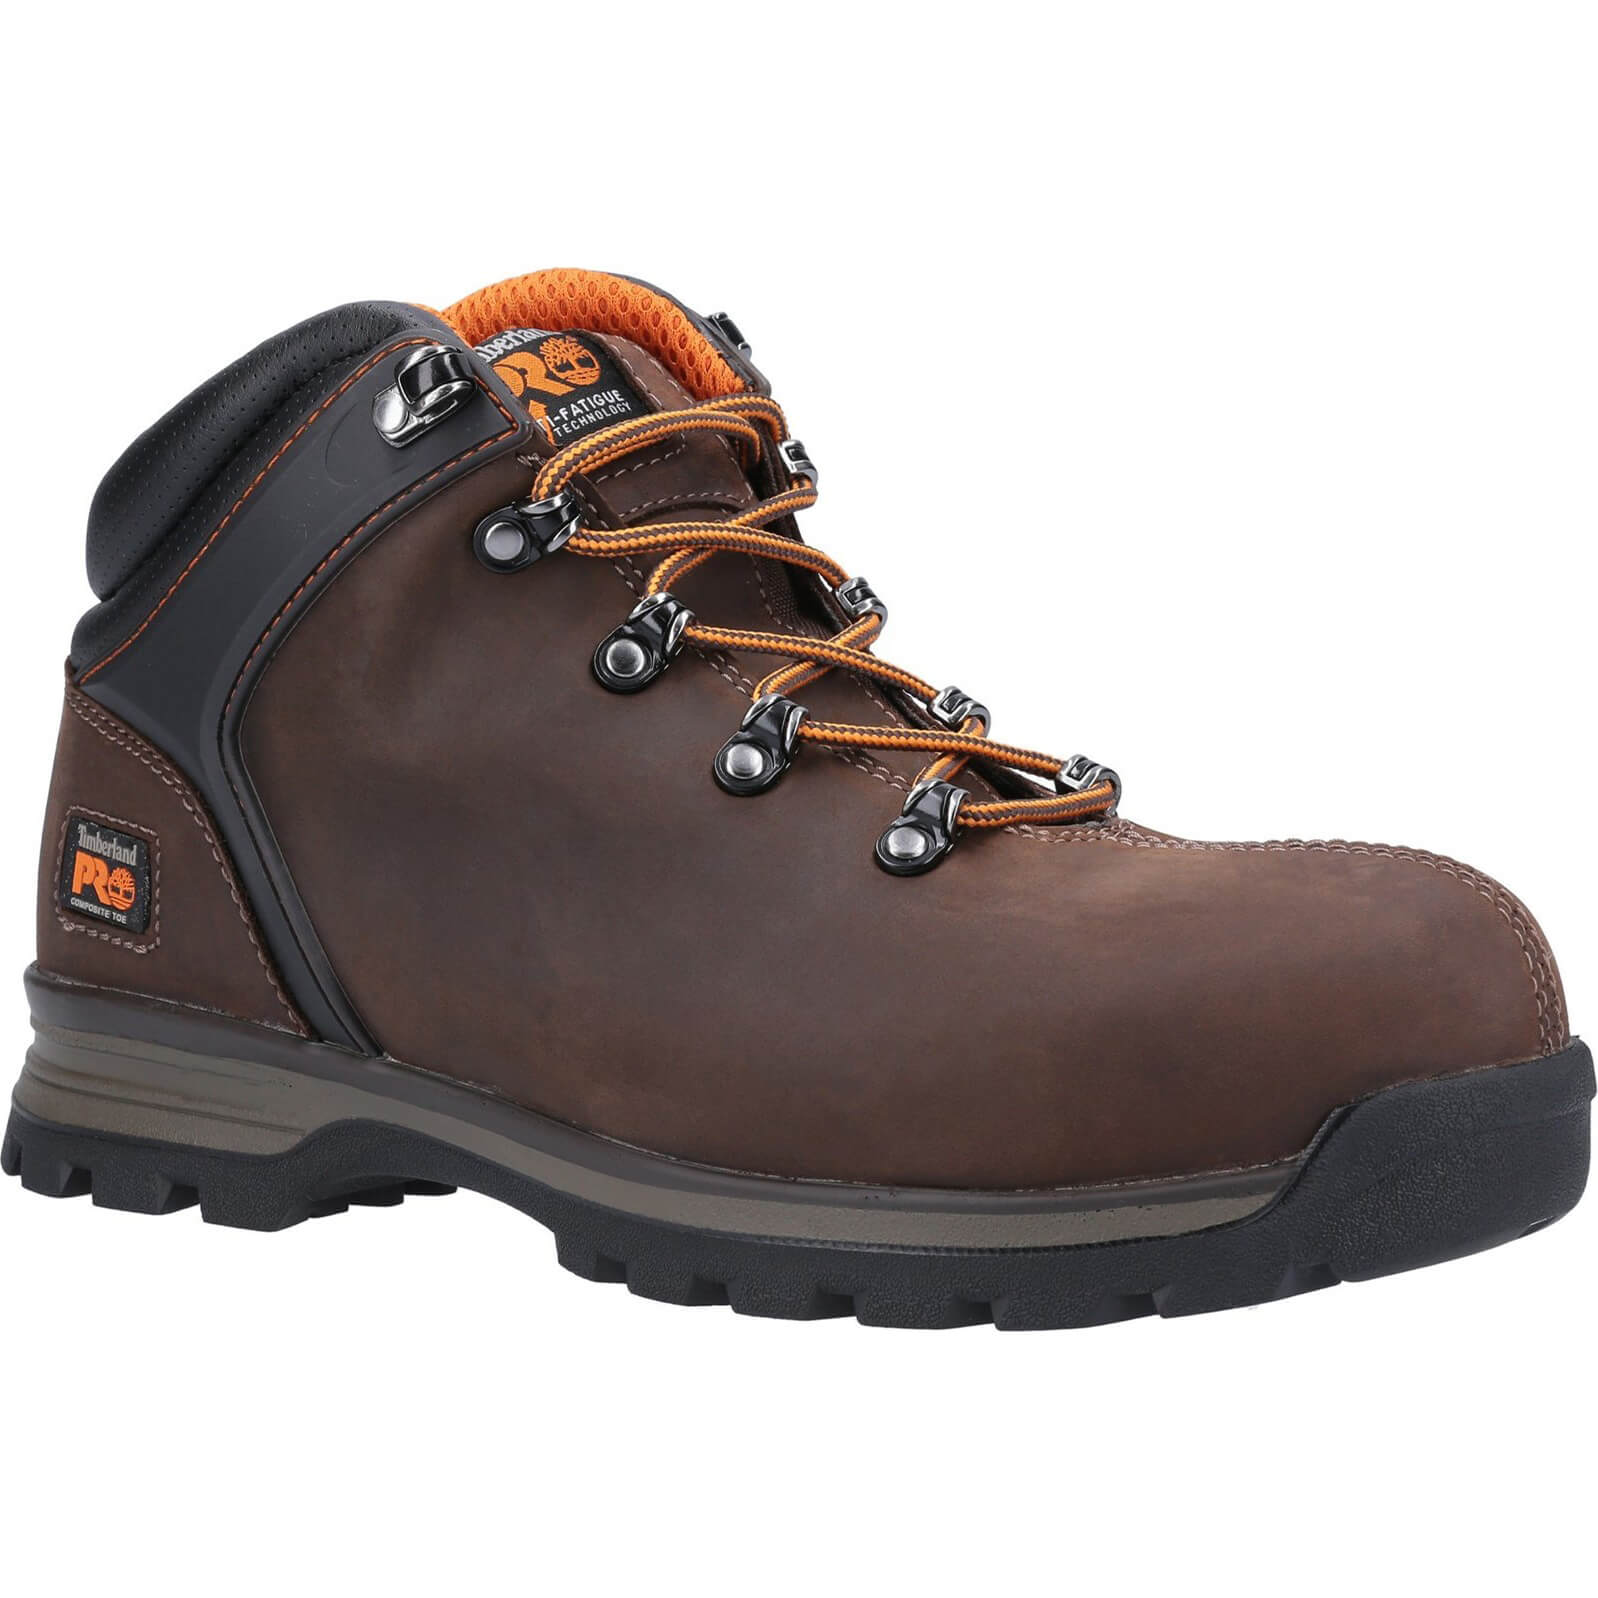 Image of Timberland Pro Splitrock XT Composite Safety Toe Work Boot Brown Size 10.5